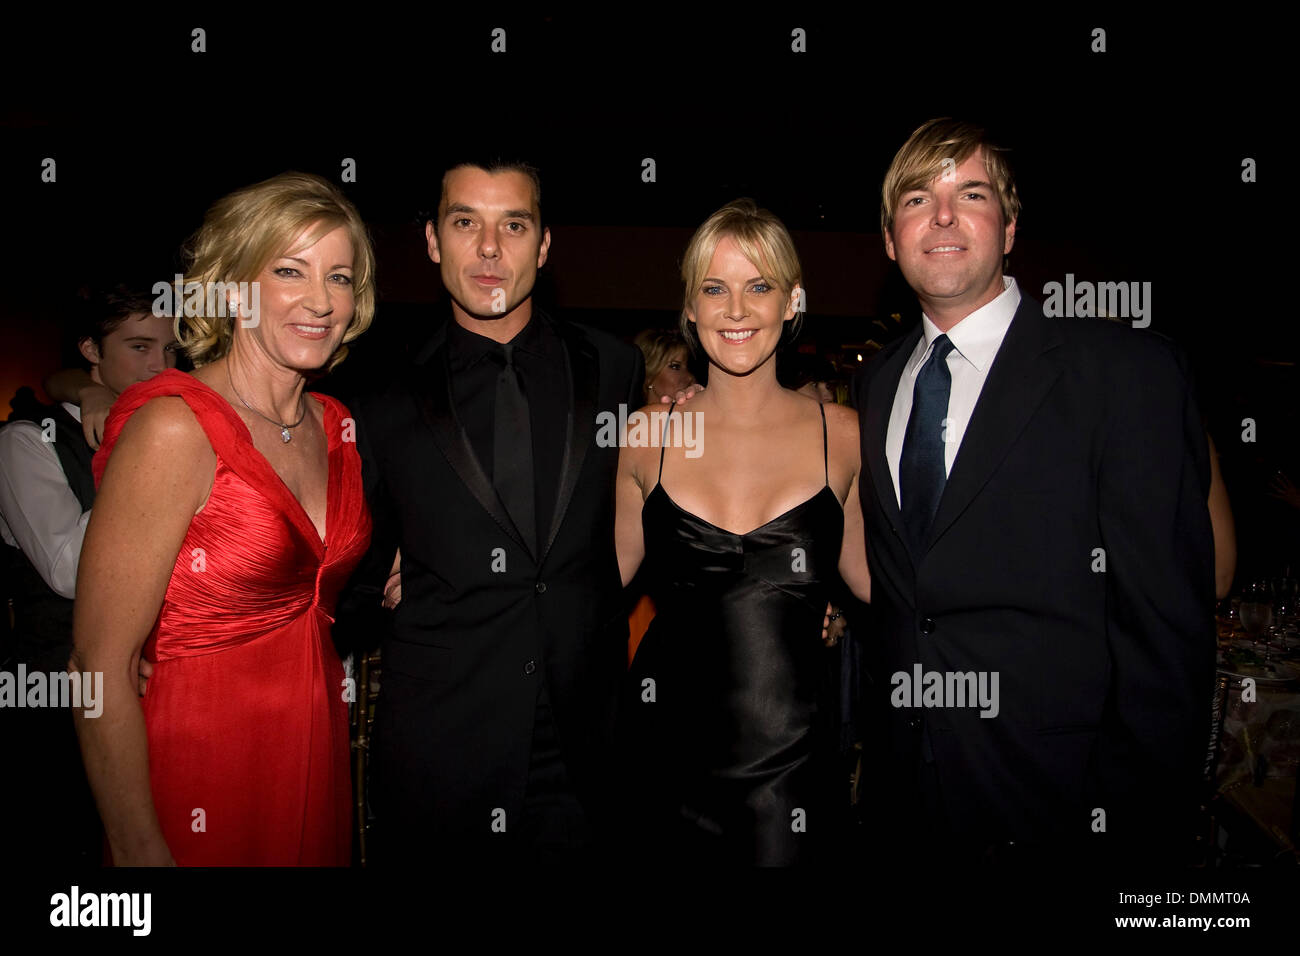 Nov 06, 2009 - Delray Beach, Florida, United States - CHRIS EVERT, GAVIN ROSSDALE, MAEVE QUINLAN and DAVID MCMILLAN at the Boca Raton Resort & Club for the 20th Annual Pro-Celebrity Gala during the Chris Evert/Raymond James Pro-Celebrity Tennis Classic. (Credit Image: © Susan Mullane/ZUMA Press) Stock Photo